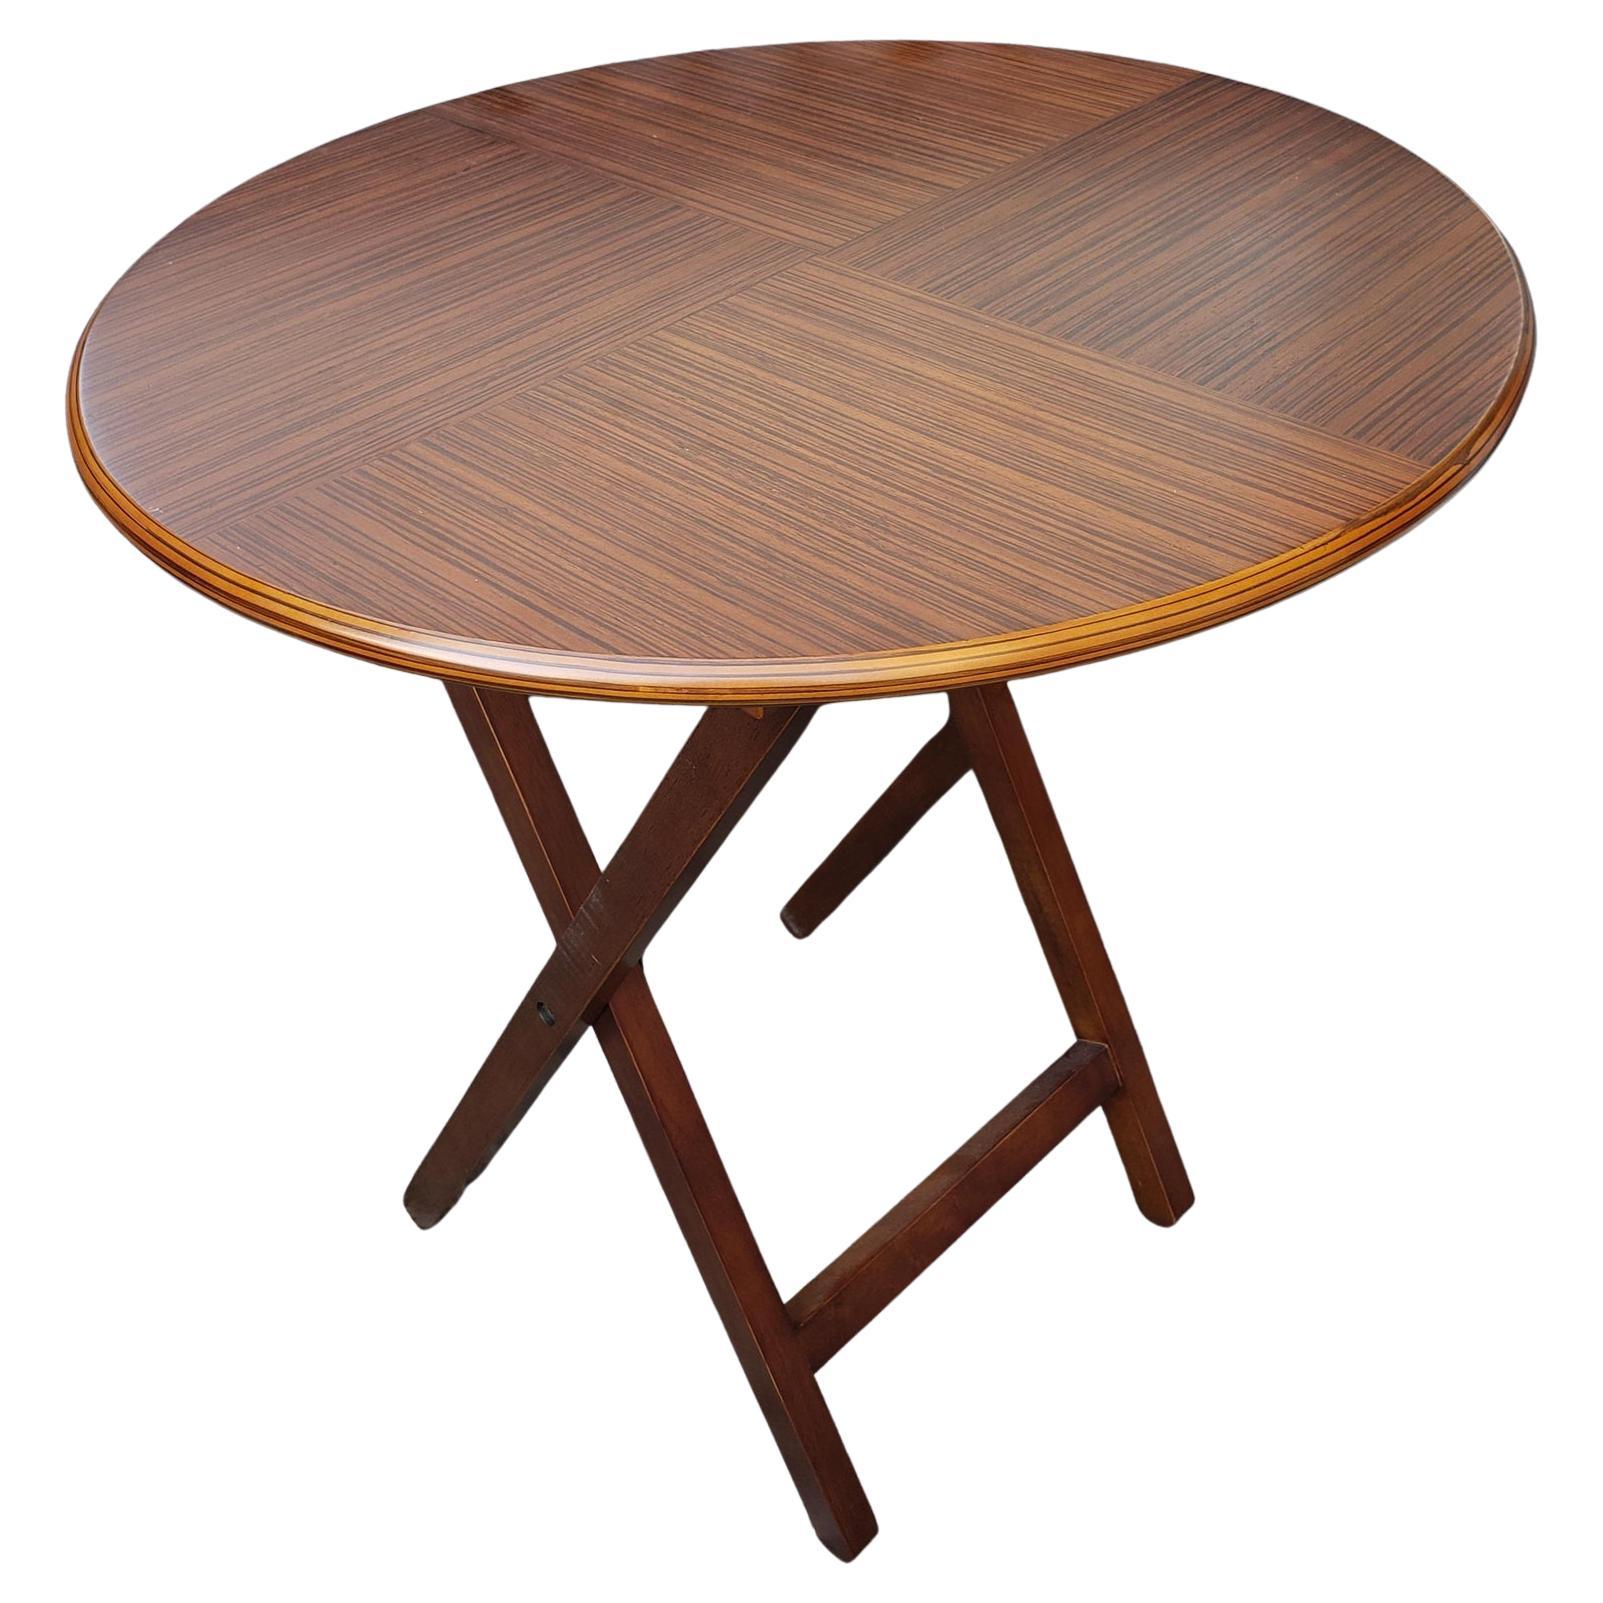 A contemporary zebra wood book matched top table with folding cross legs that can be used as center table, side table, or game table. The table has a beautiful modern look that can work with both contemporary and traditional designs. It measures